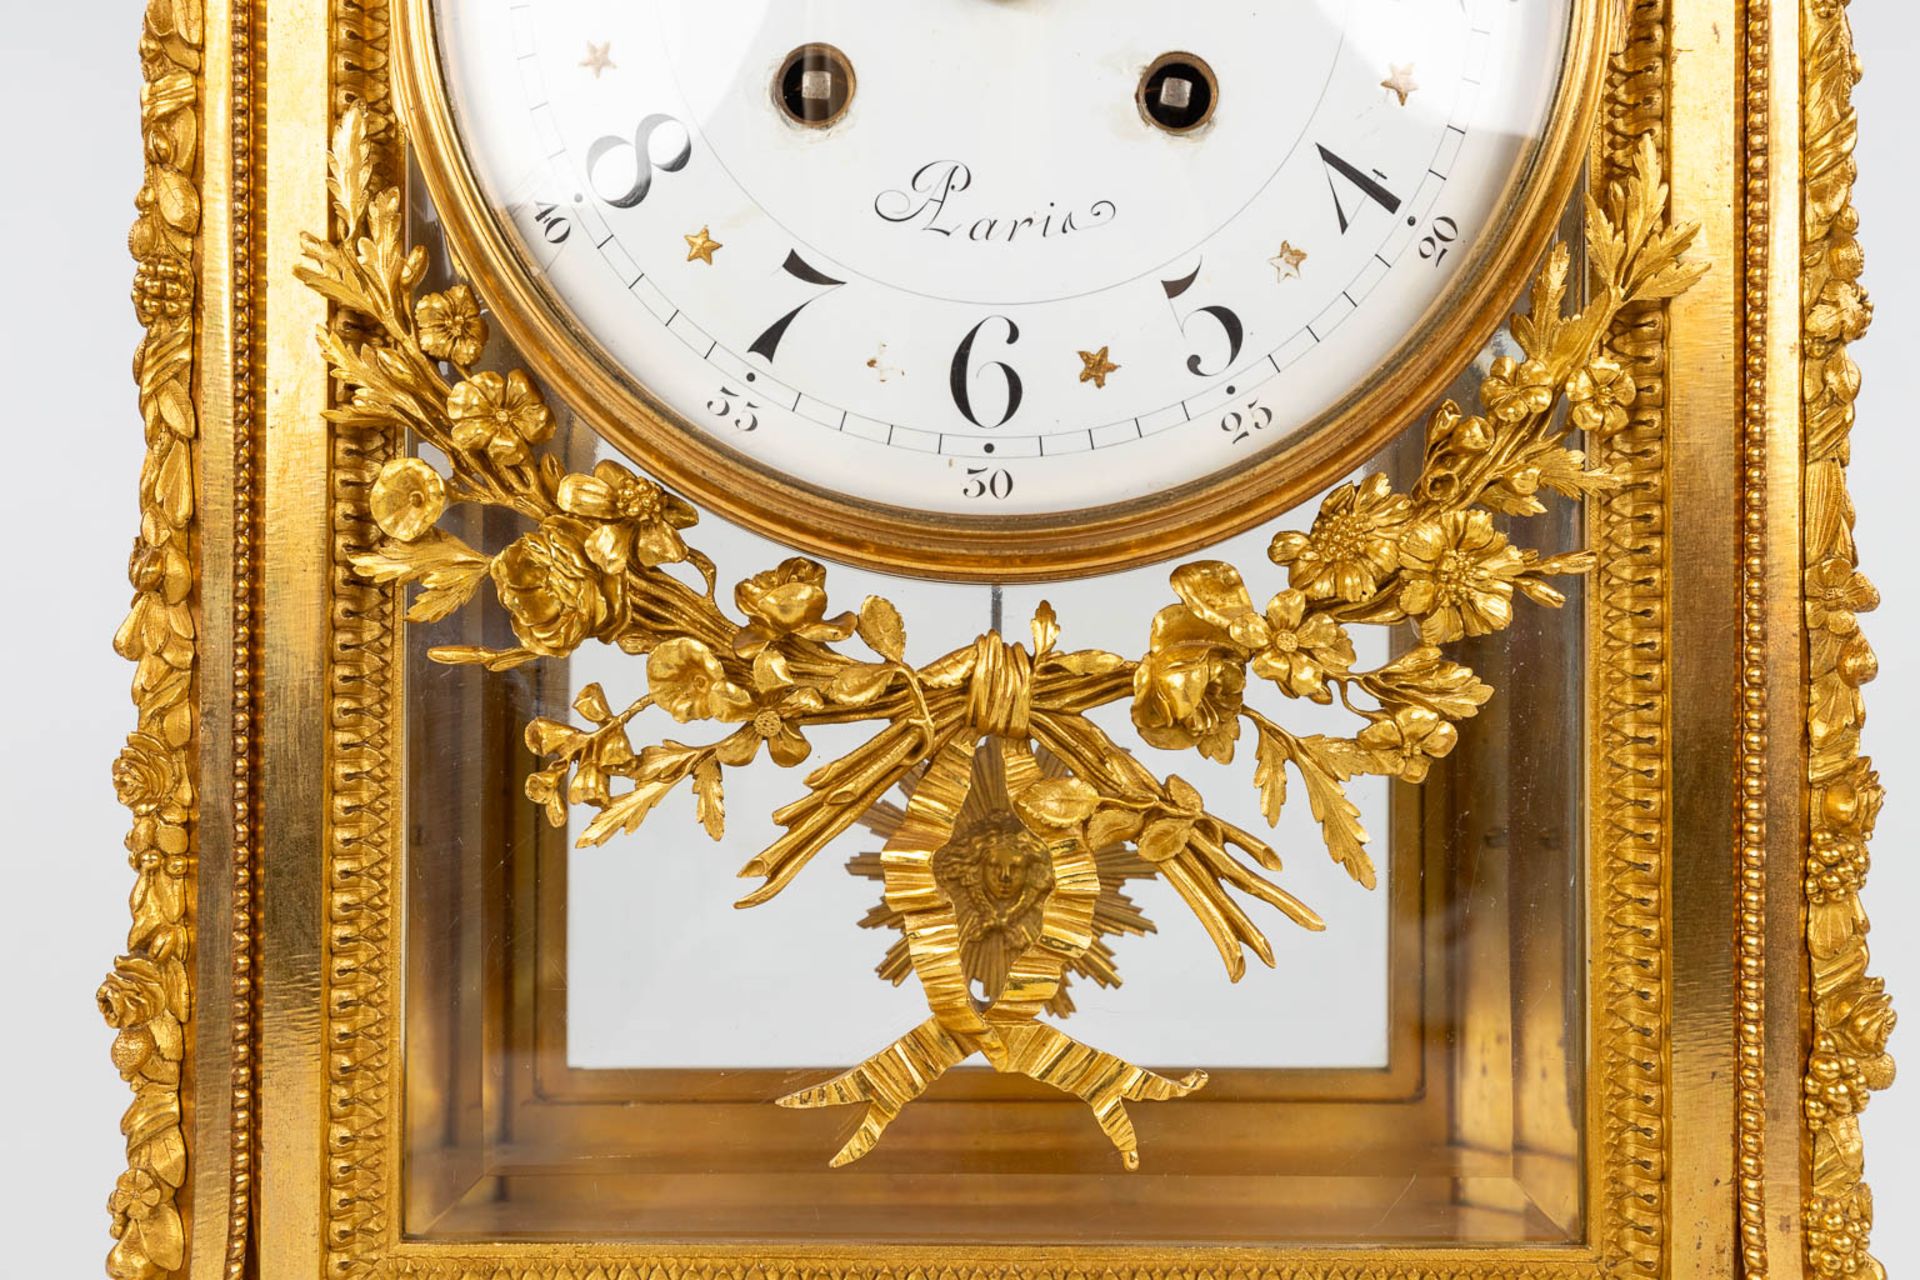 An imposing three-piece mantle garniture clock and candelabra, gilt bronze in Louis XVI style. Maiso - Image 6 of 38